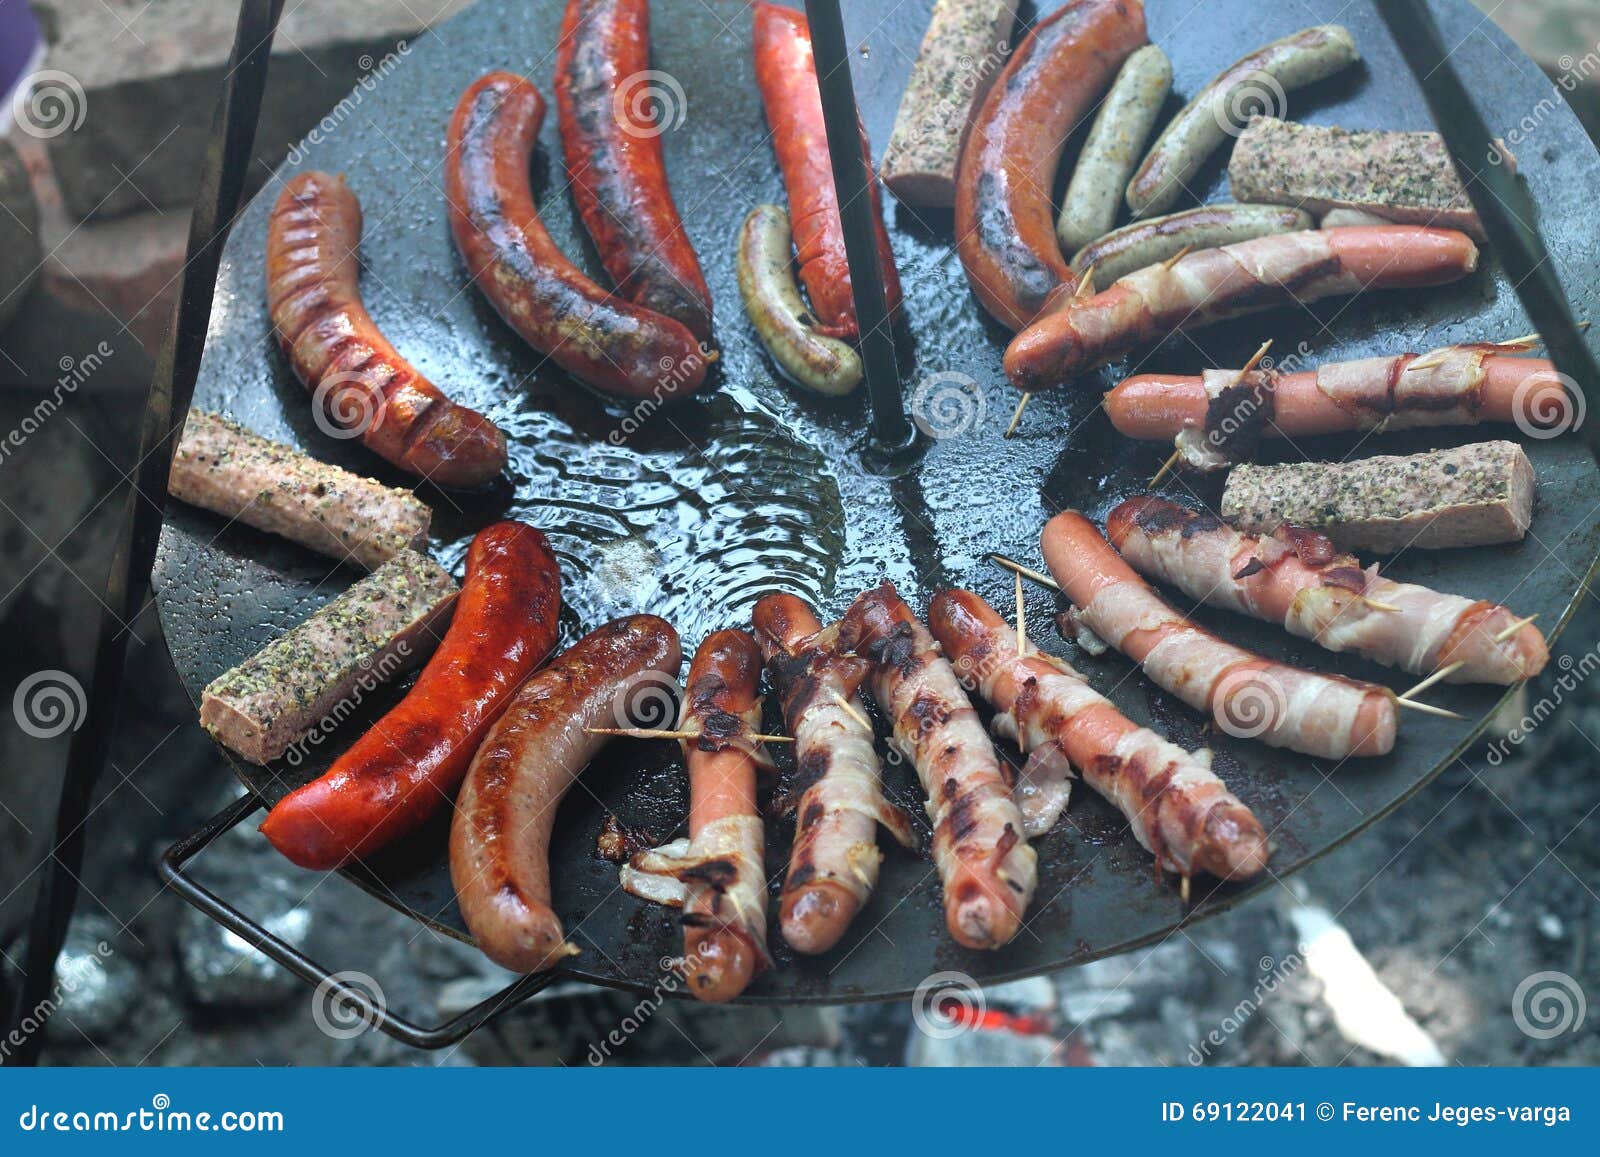 sausages at the camp fire